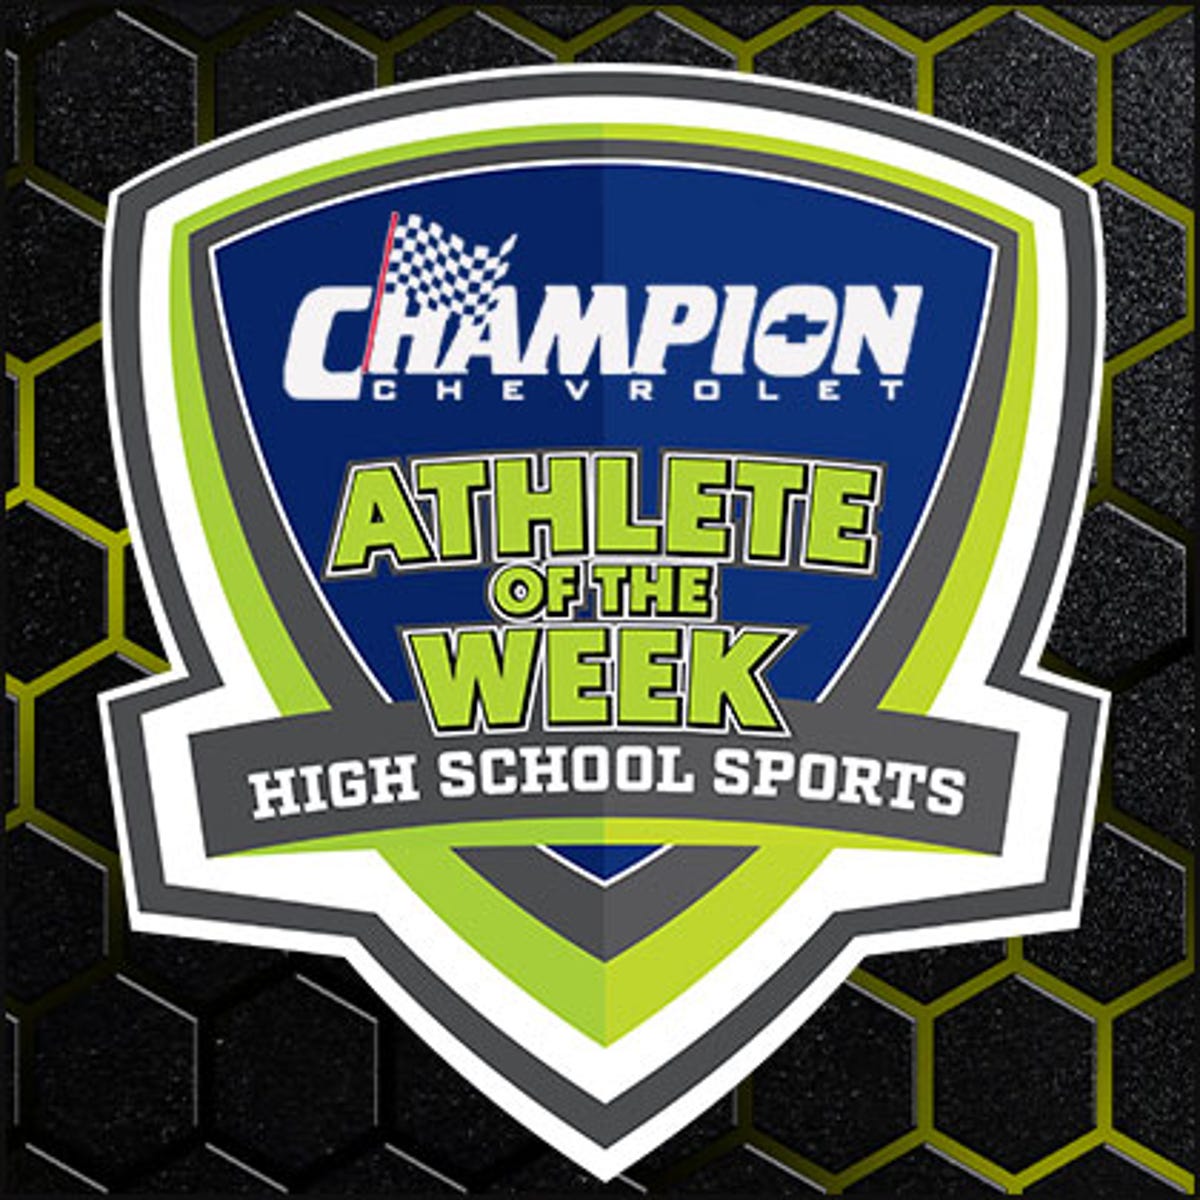 Top High School Athletes Nominated for Champion Chevrolet Athlete of the Week in Northern Nevada